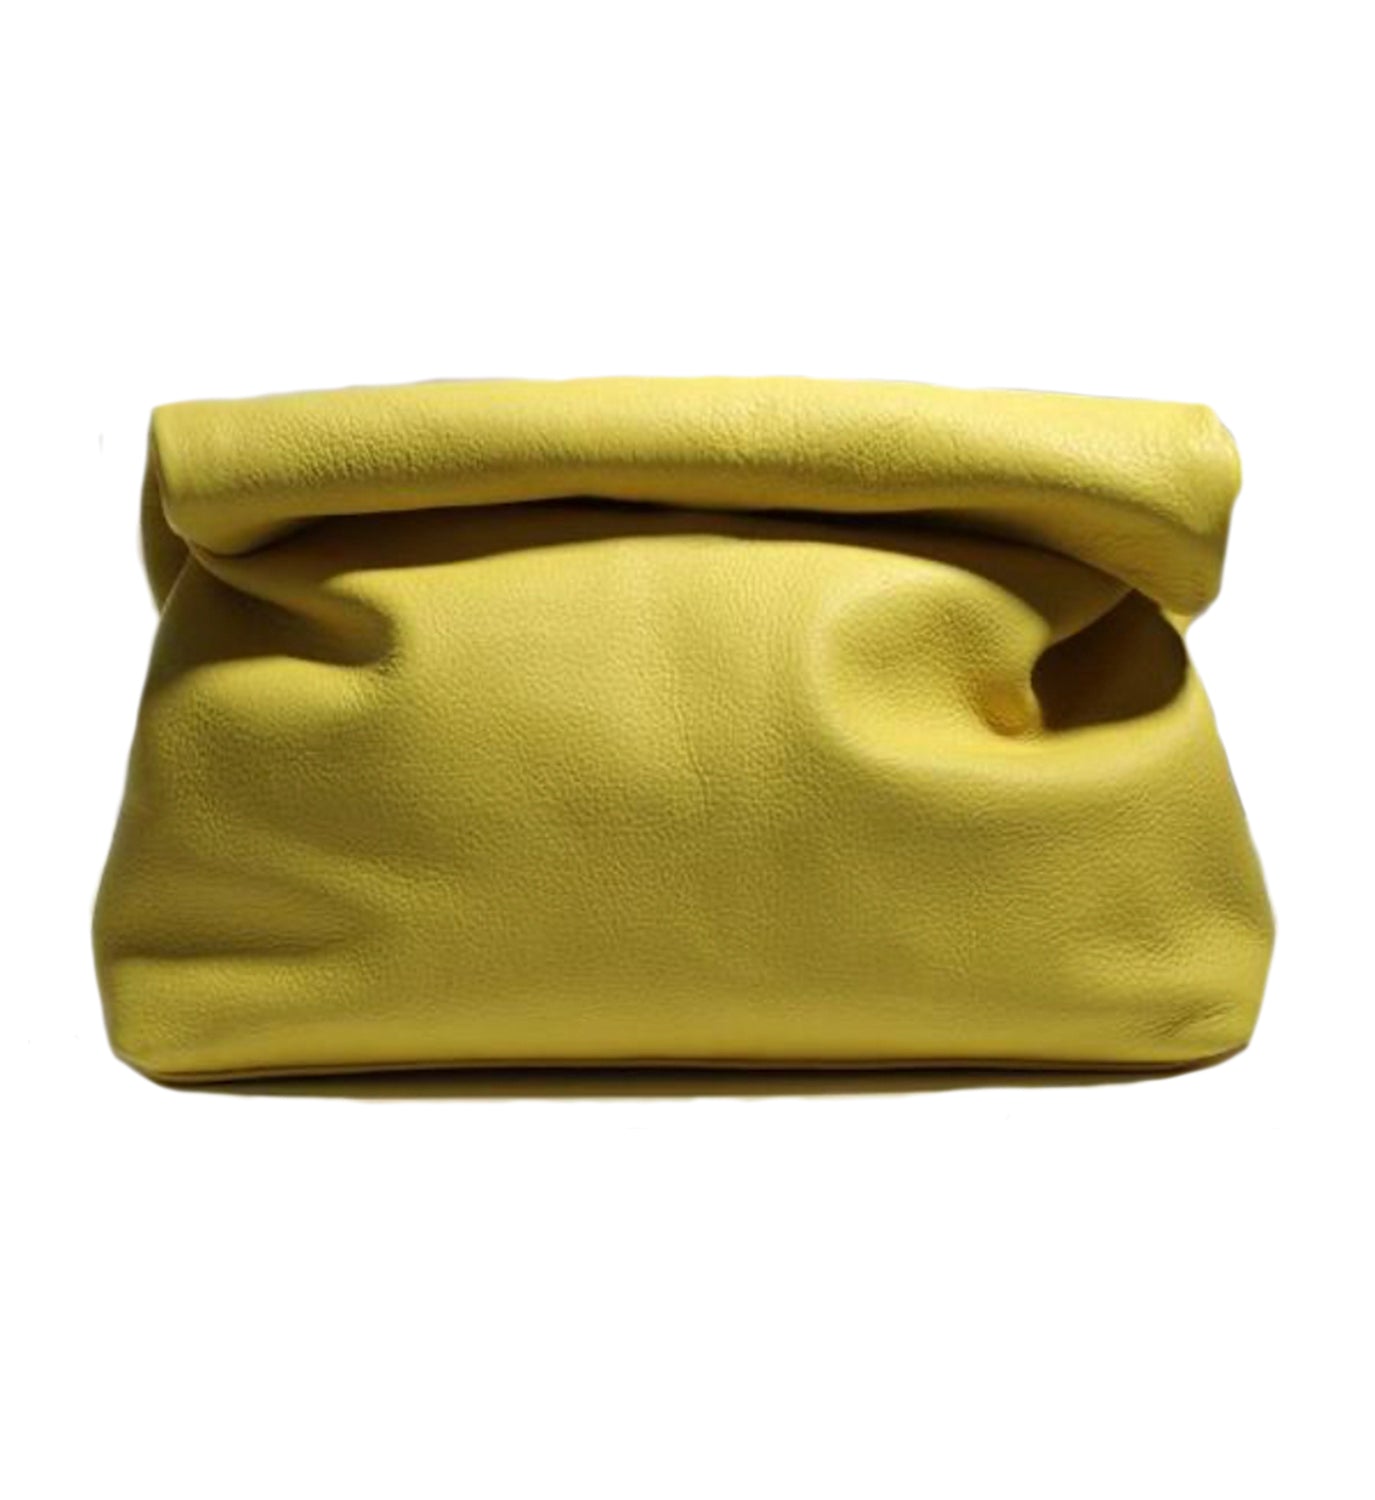 Roll Up Leather Clutch Bag